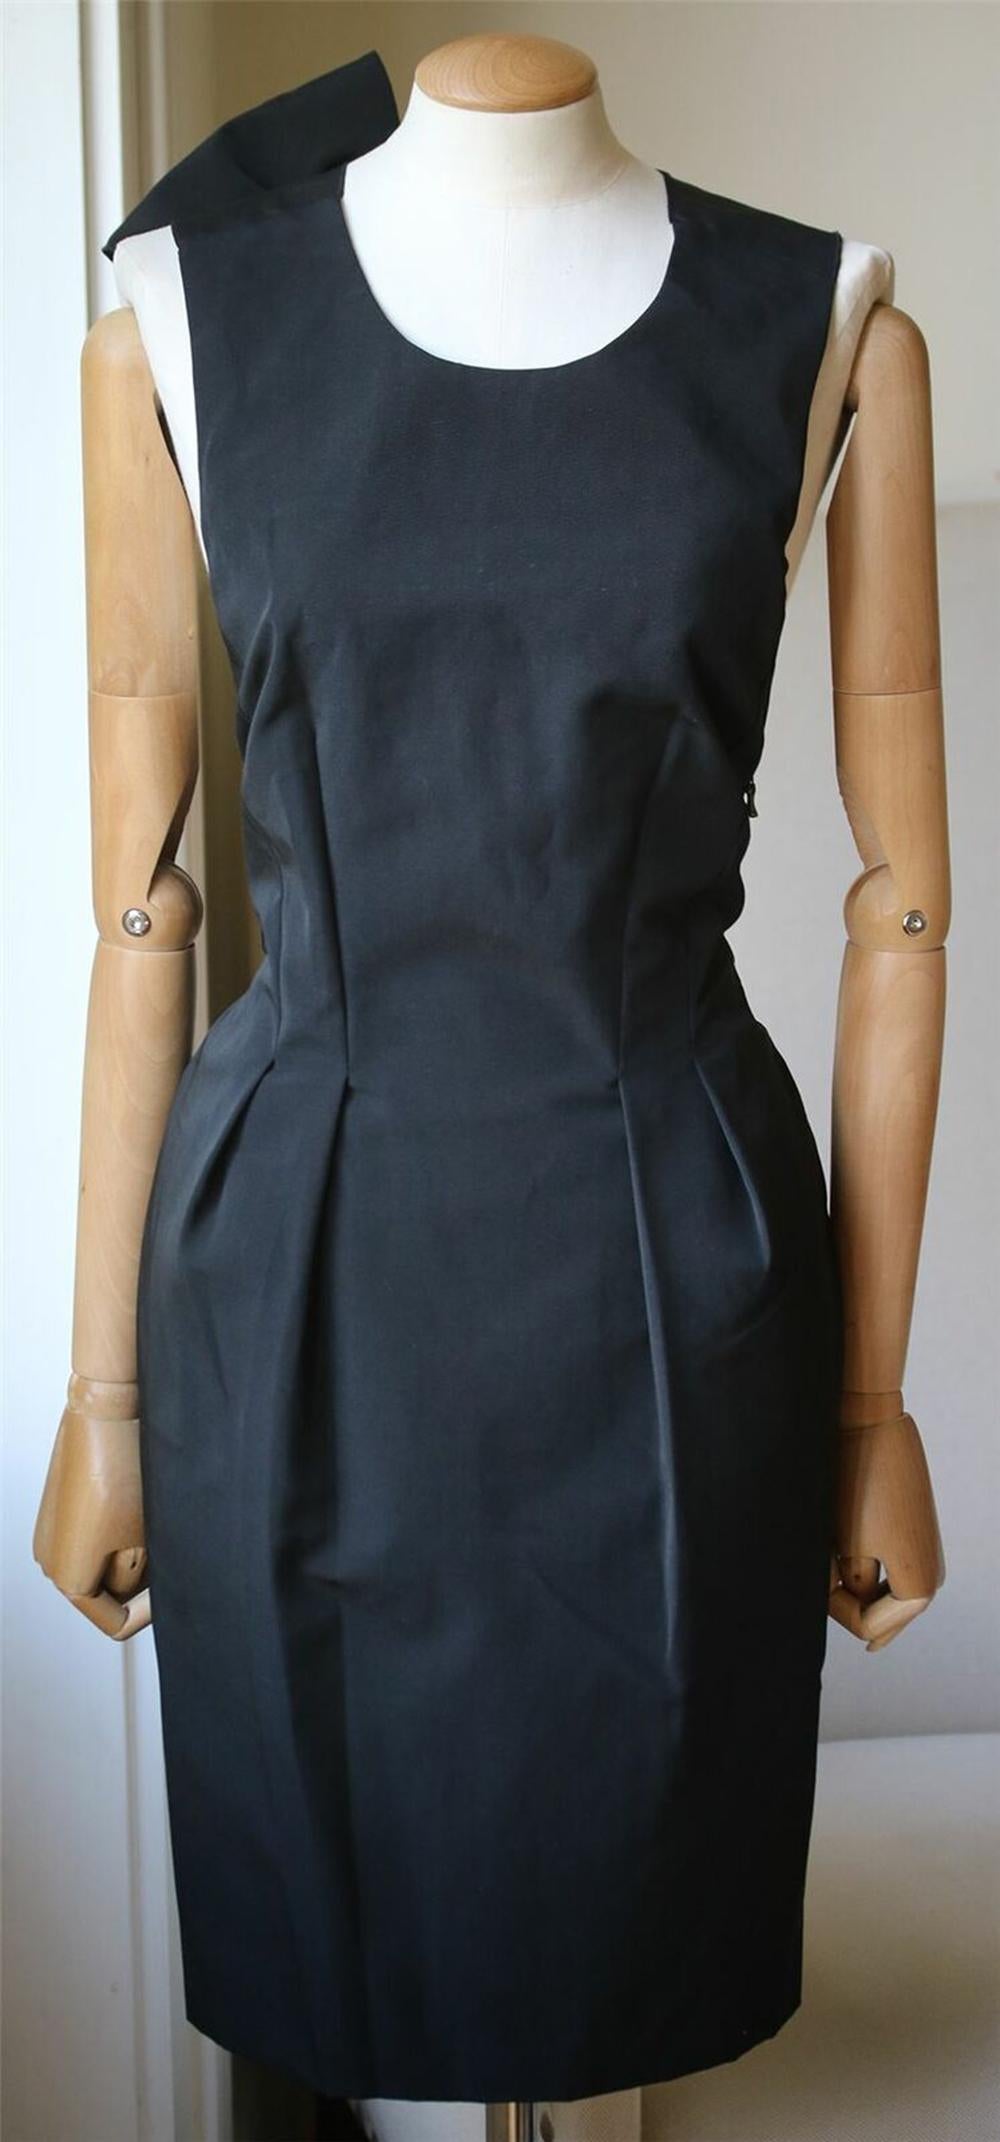 Sleeveless a-line dress in black. Crewneck collar. Oversized bow at open back. Silk satin lining. Zip closure at side. Tonal stitching. Body: 51% polyester, 49% cotton. Lining: 100% silk. Made in France. Colour: black.

Size: FR 36 (UK 8, US 4, IT